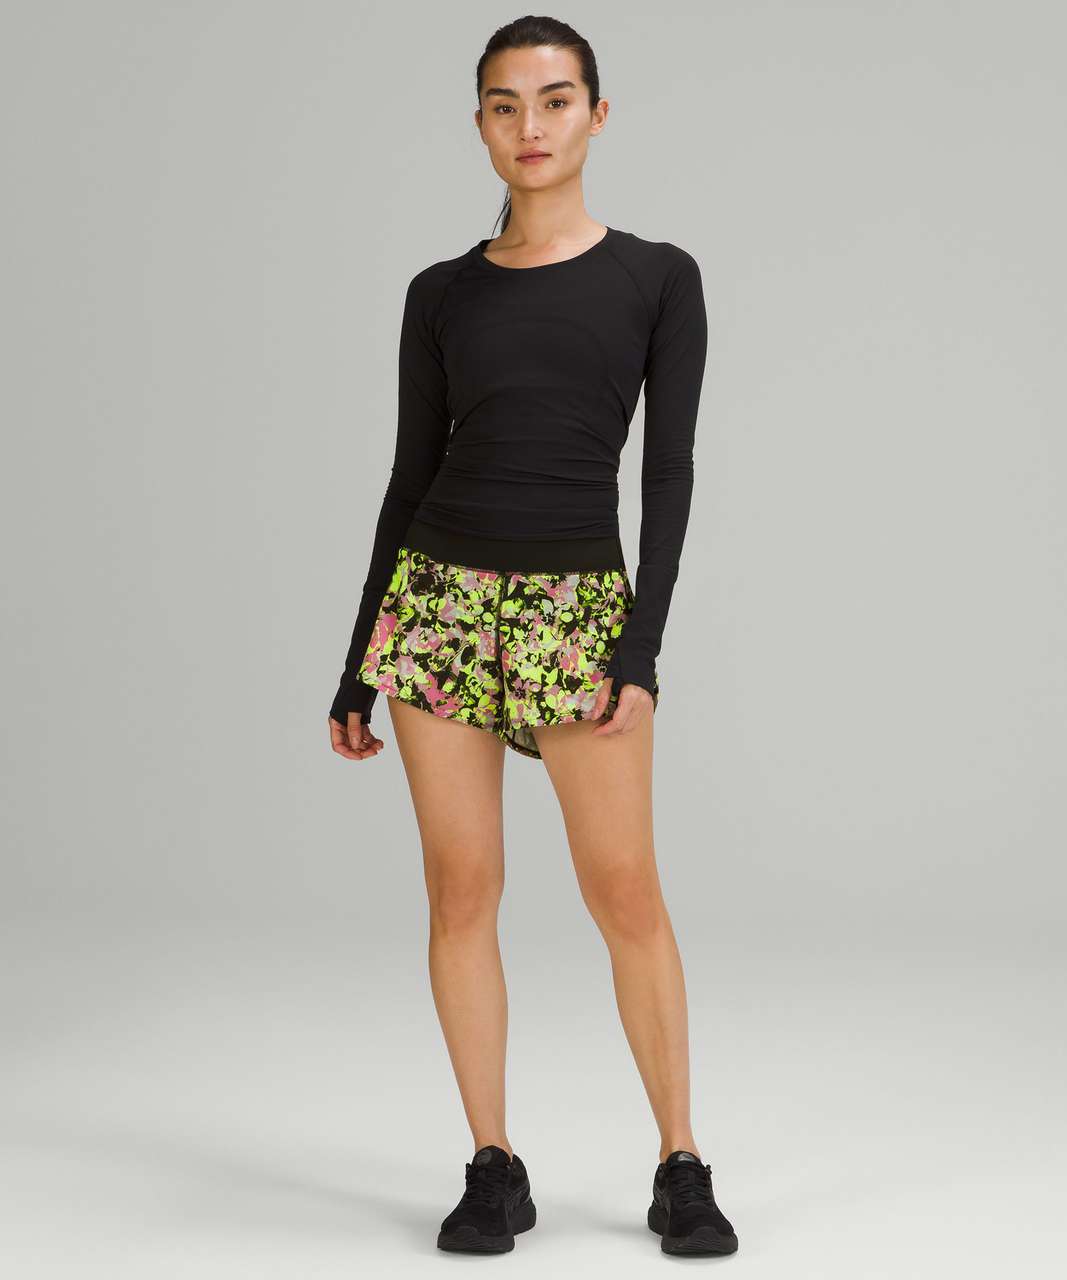 Lululemon Speed Up Mid-Rise Lined Short 4" - Inflected Highlight Yellow Multi / Black